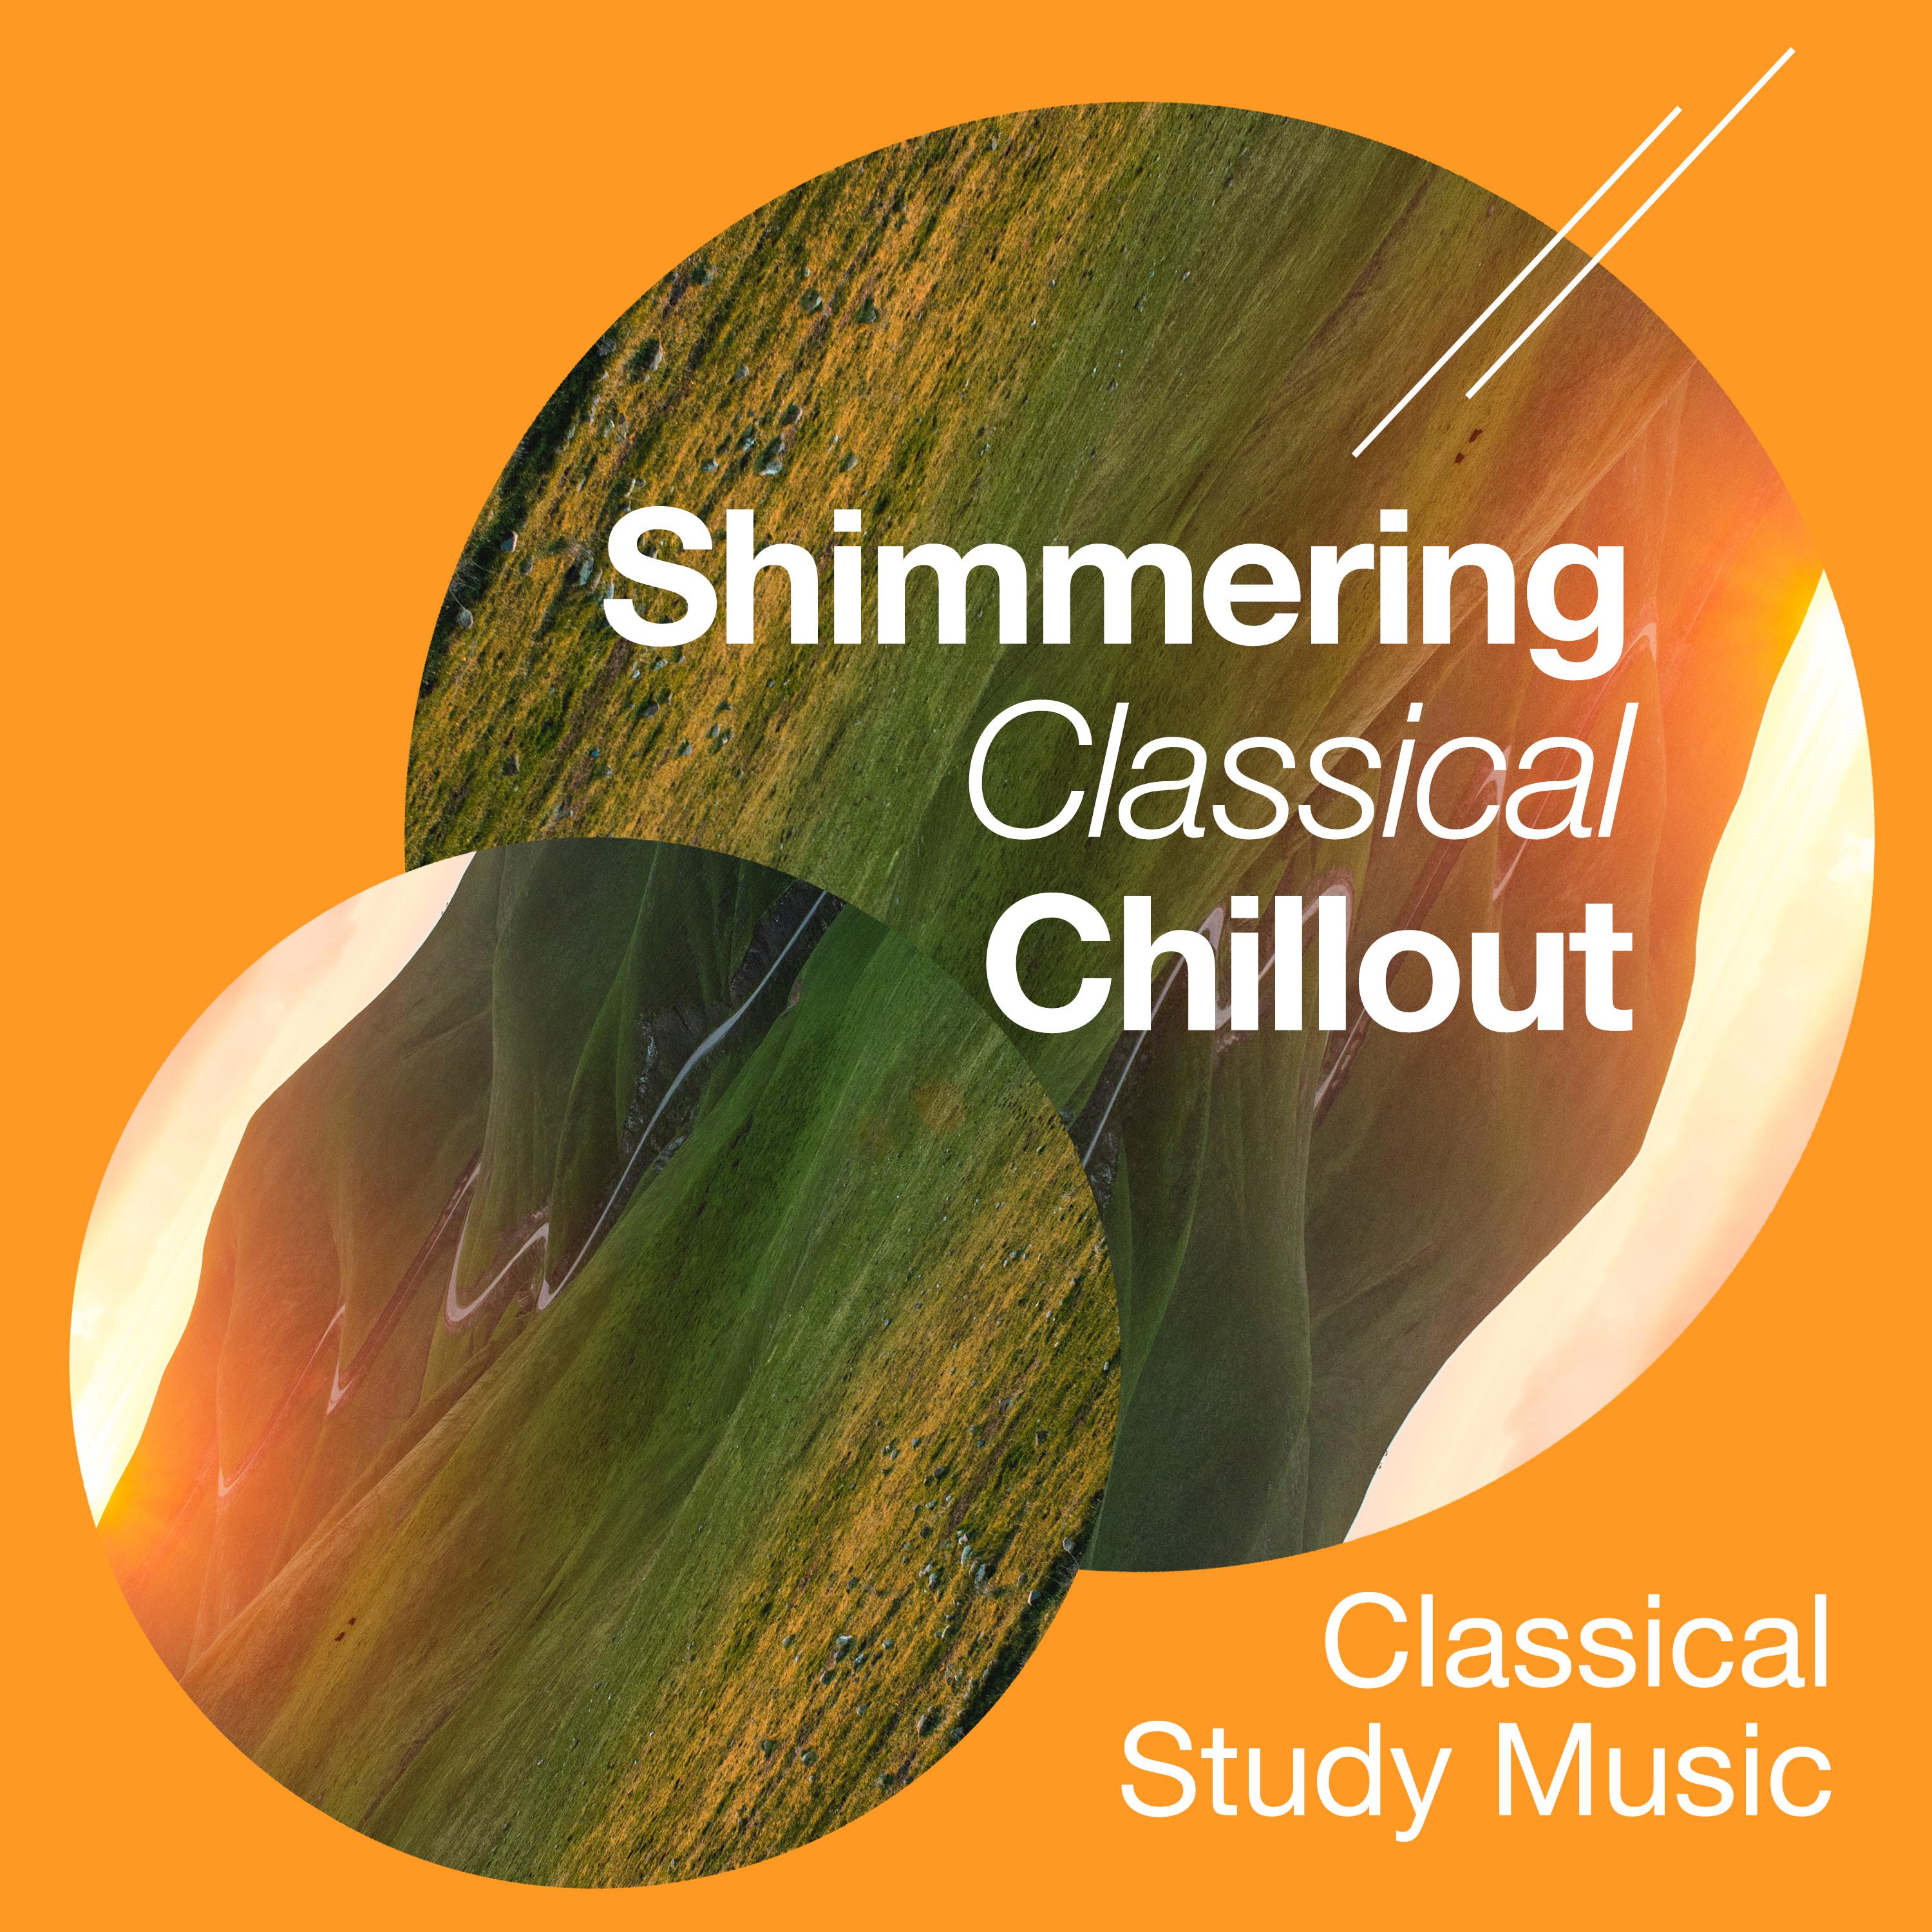 Shimmering Classical Chillout